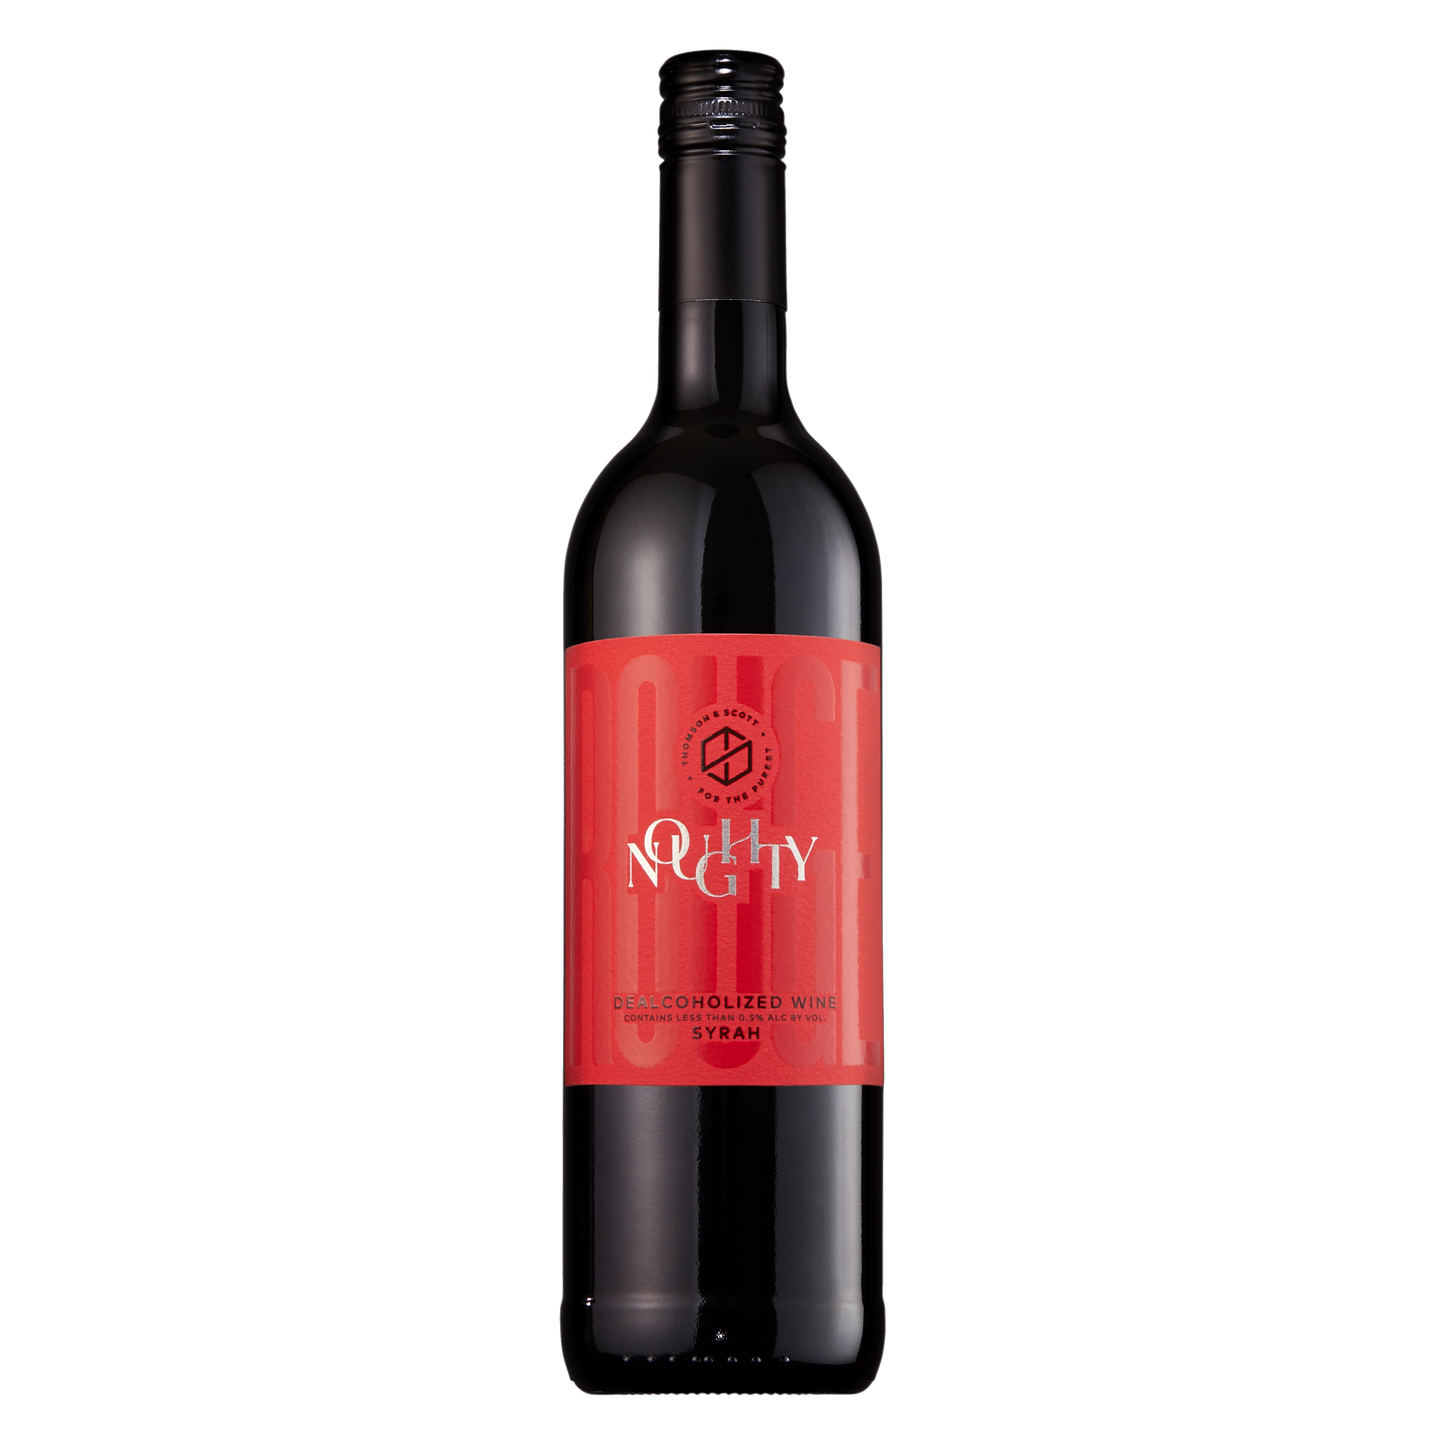 Noughty Rouge Canada - Non-Alcoholic Syrah - south africa grapes - great tasting non-alcoholic wine